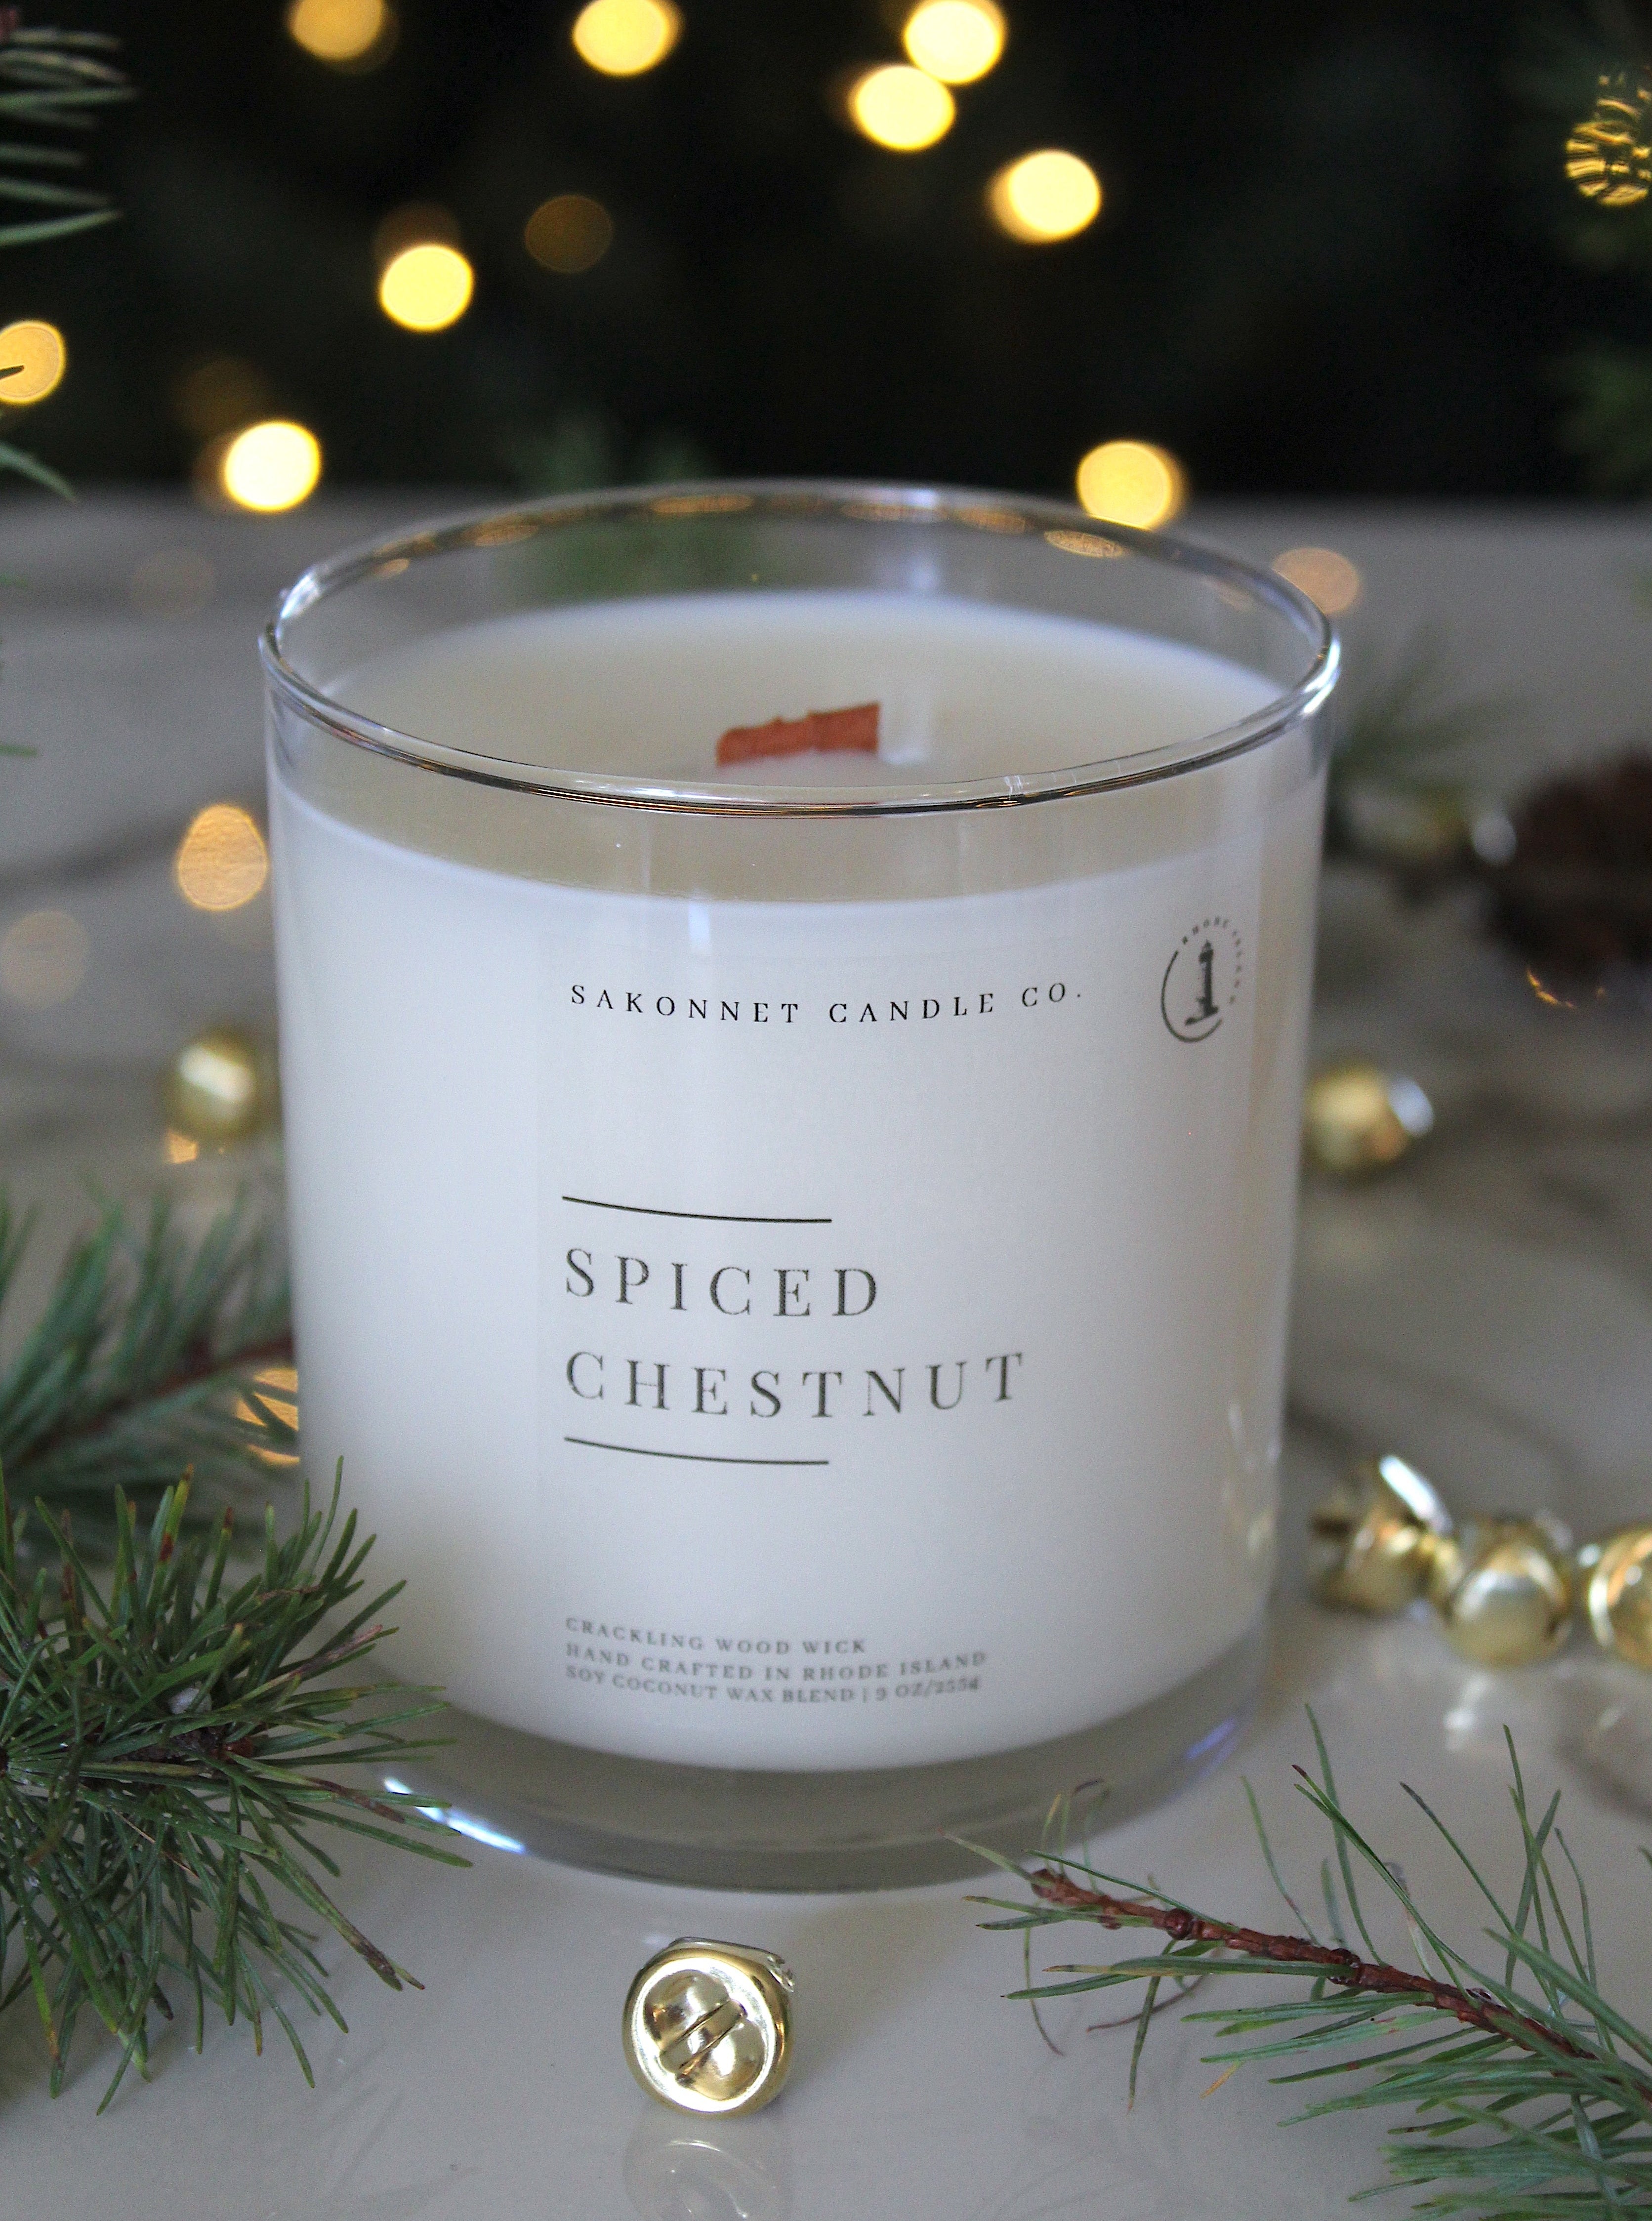 Spiced Chestnut Soy Candle